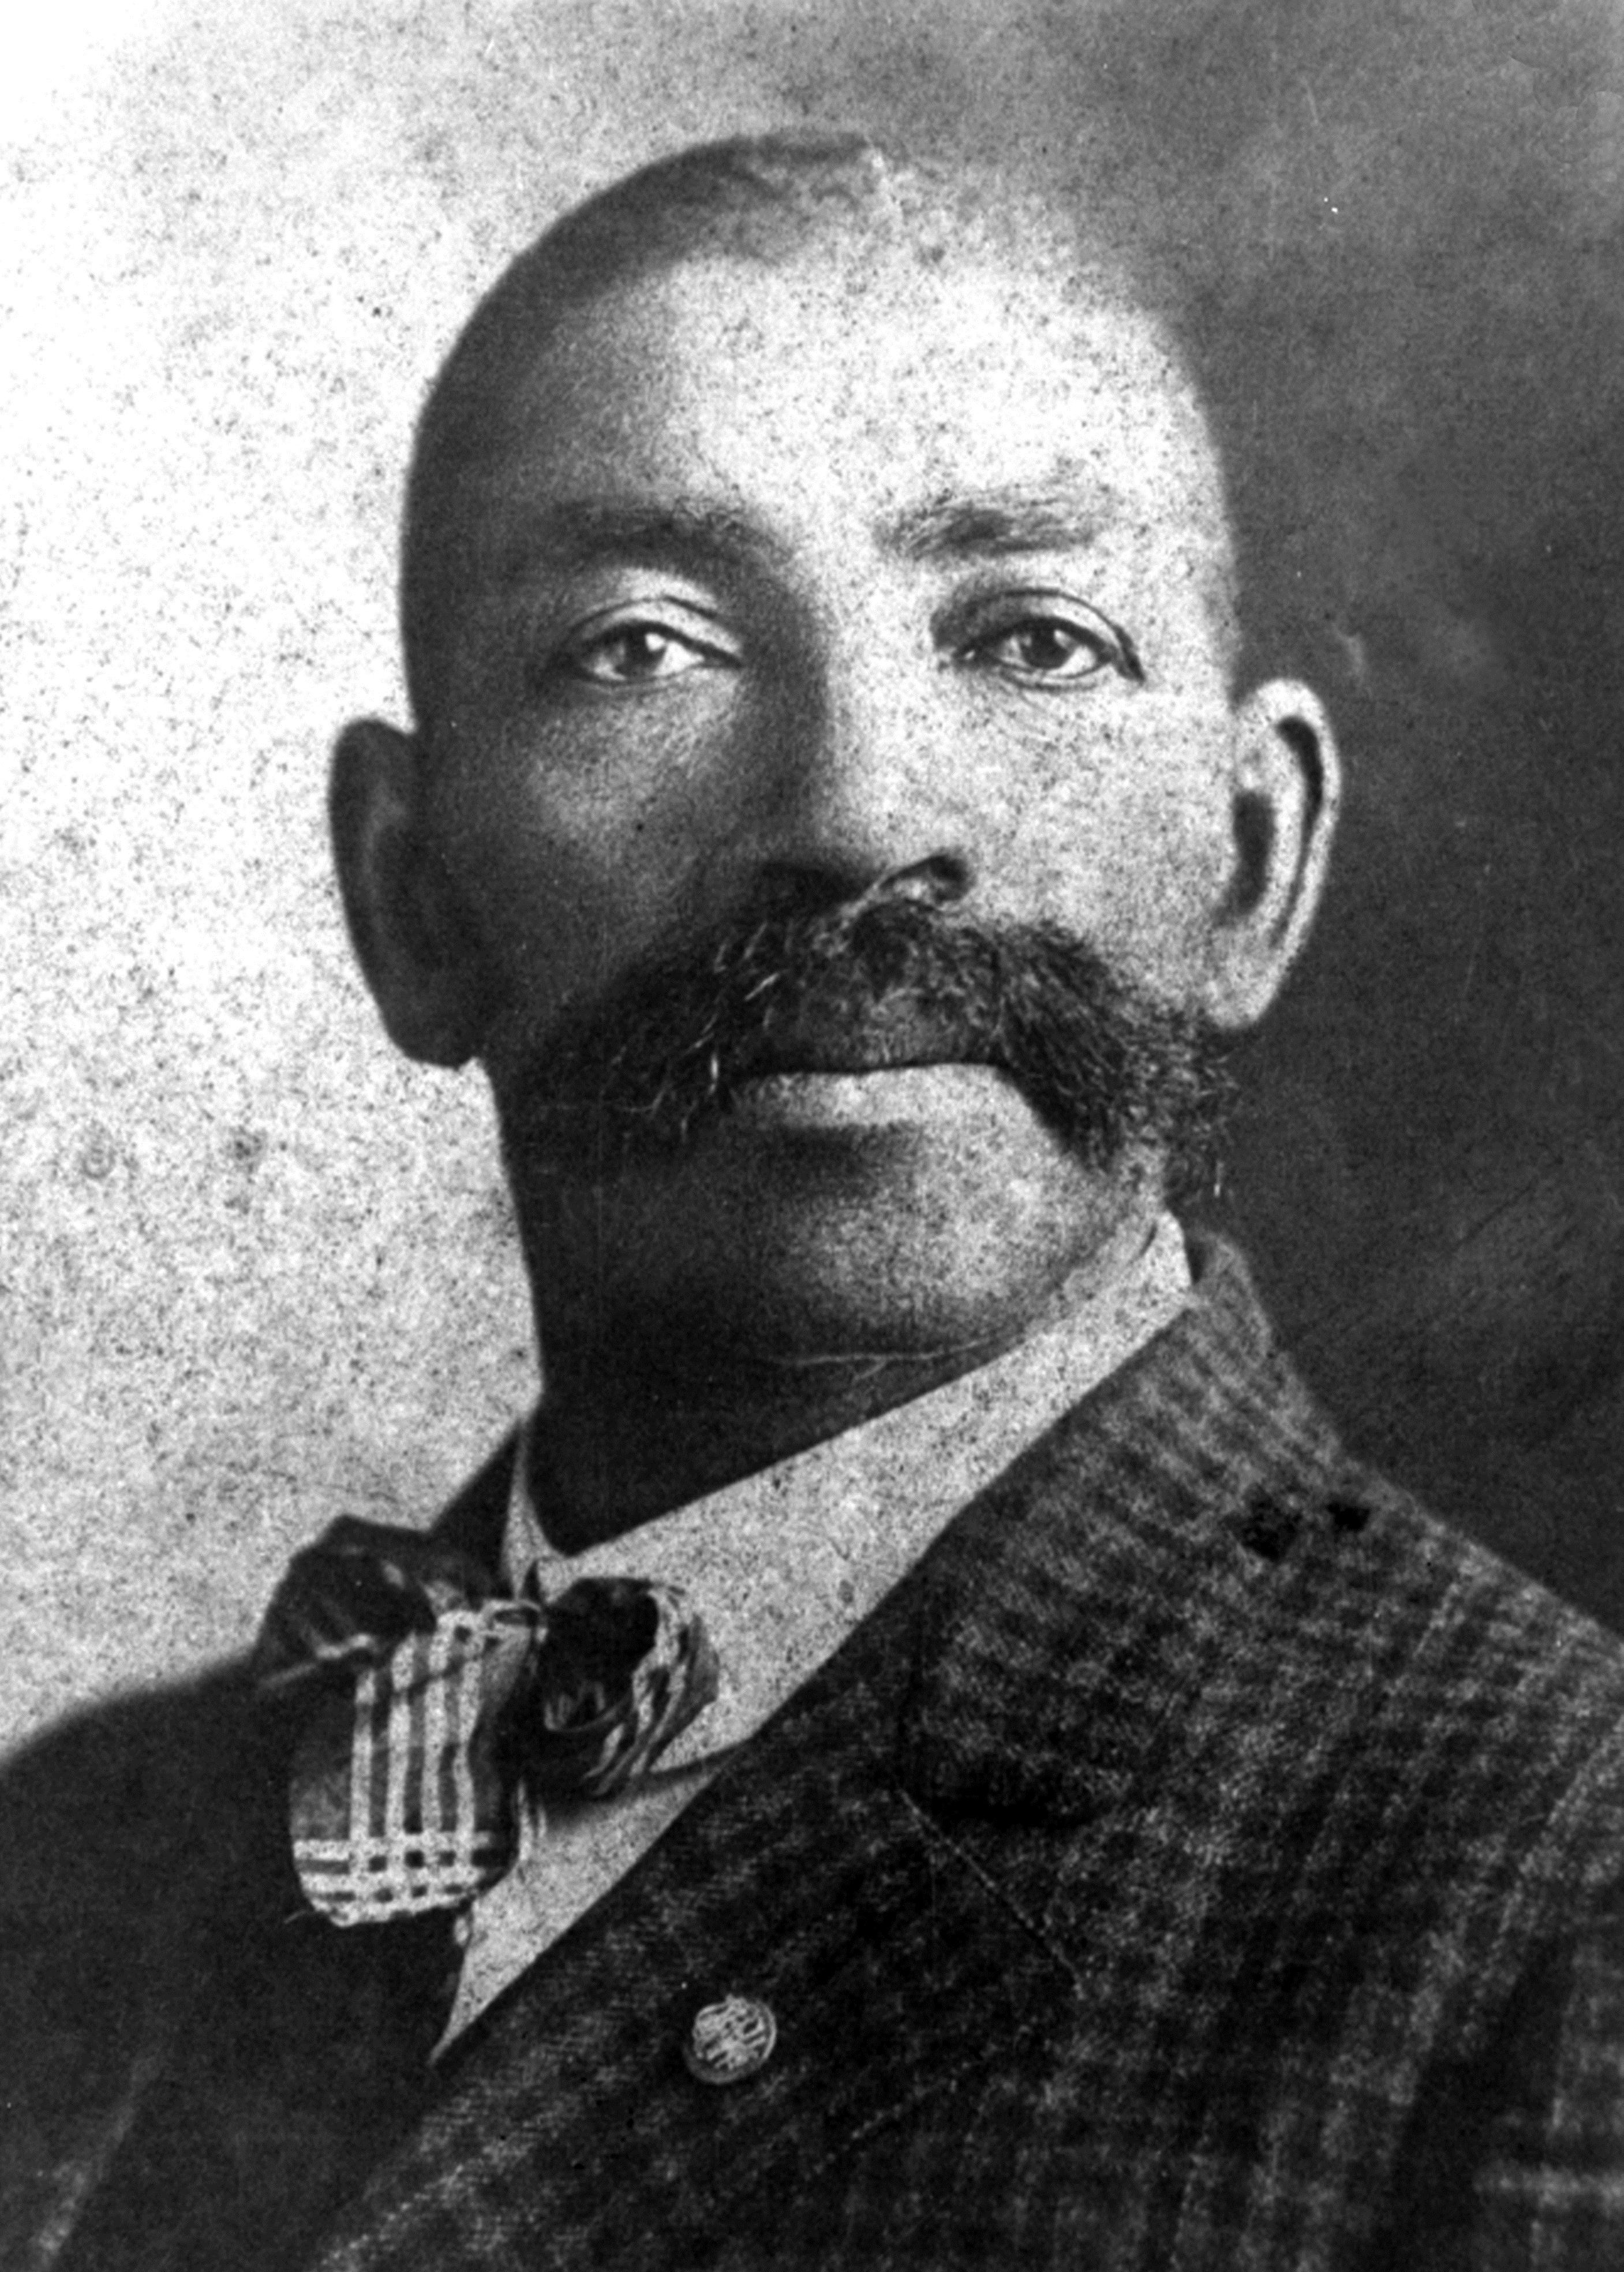 The picture is grainy but the eagle eyes are sharp: Western lawman Bass Reeves, real-life subject of 'Cowboy,' always got his man. (photographer and date unknown)